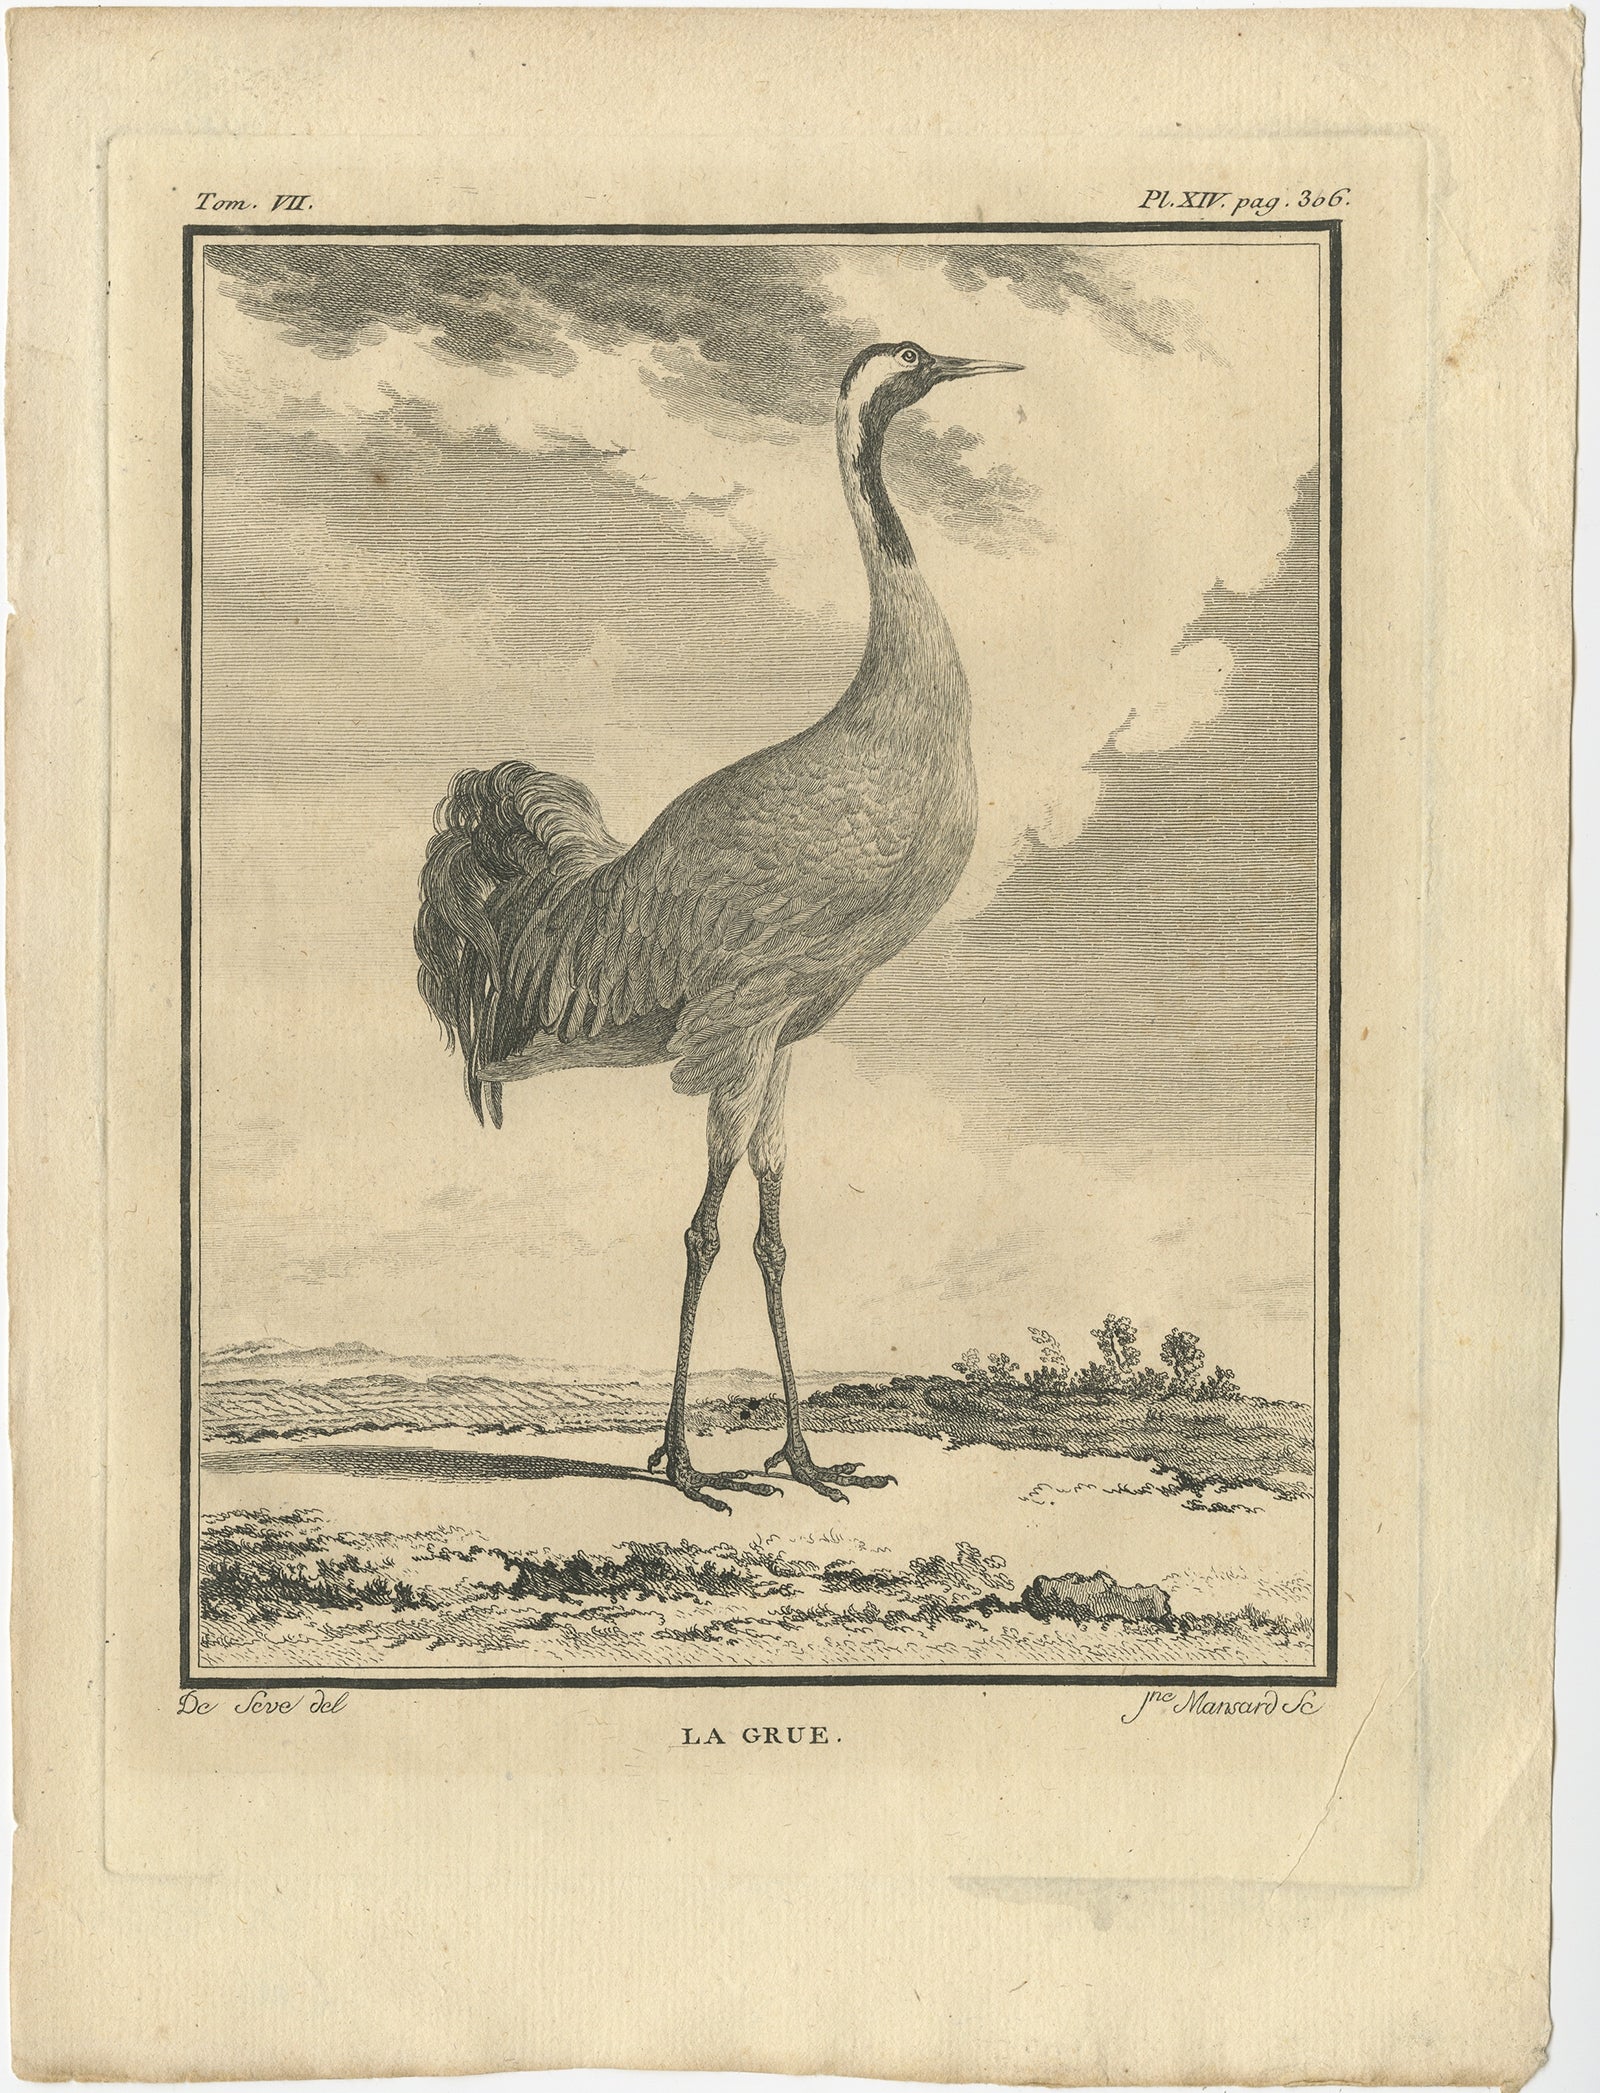 Antique print titled ‘La Grue’. This print depicts the crane bird and originates from Buffon’s ‘Histoire Naturelle’, published in Paris 1795.

Artists and Engravers: Comte de Buffon (September 7, 1707 - April 16, 1788). French naturalist,